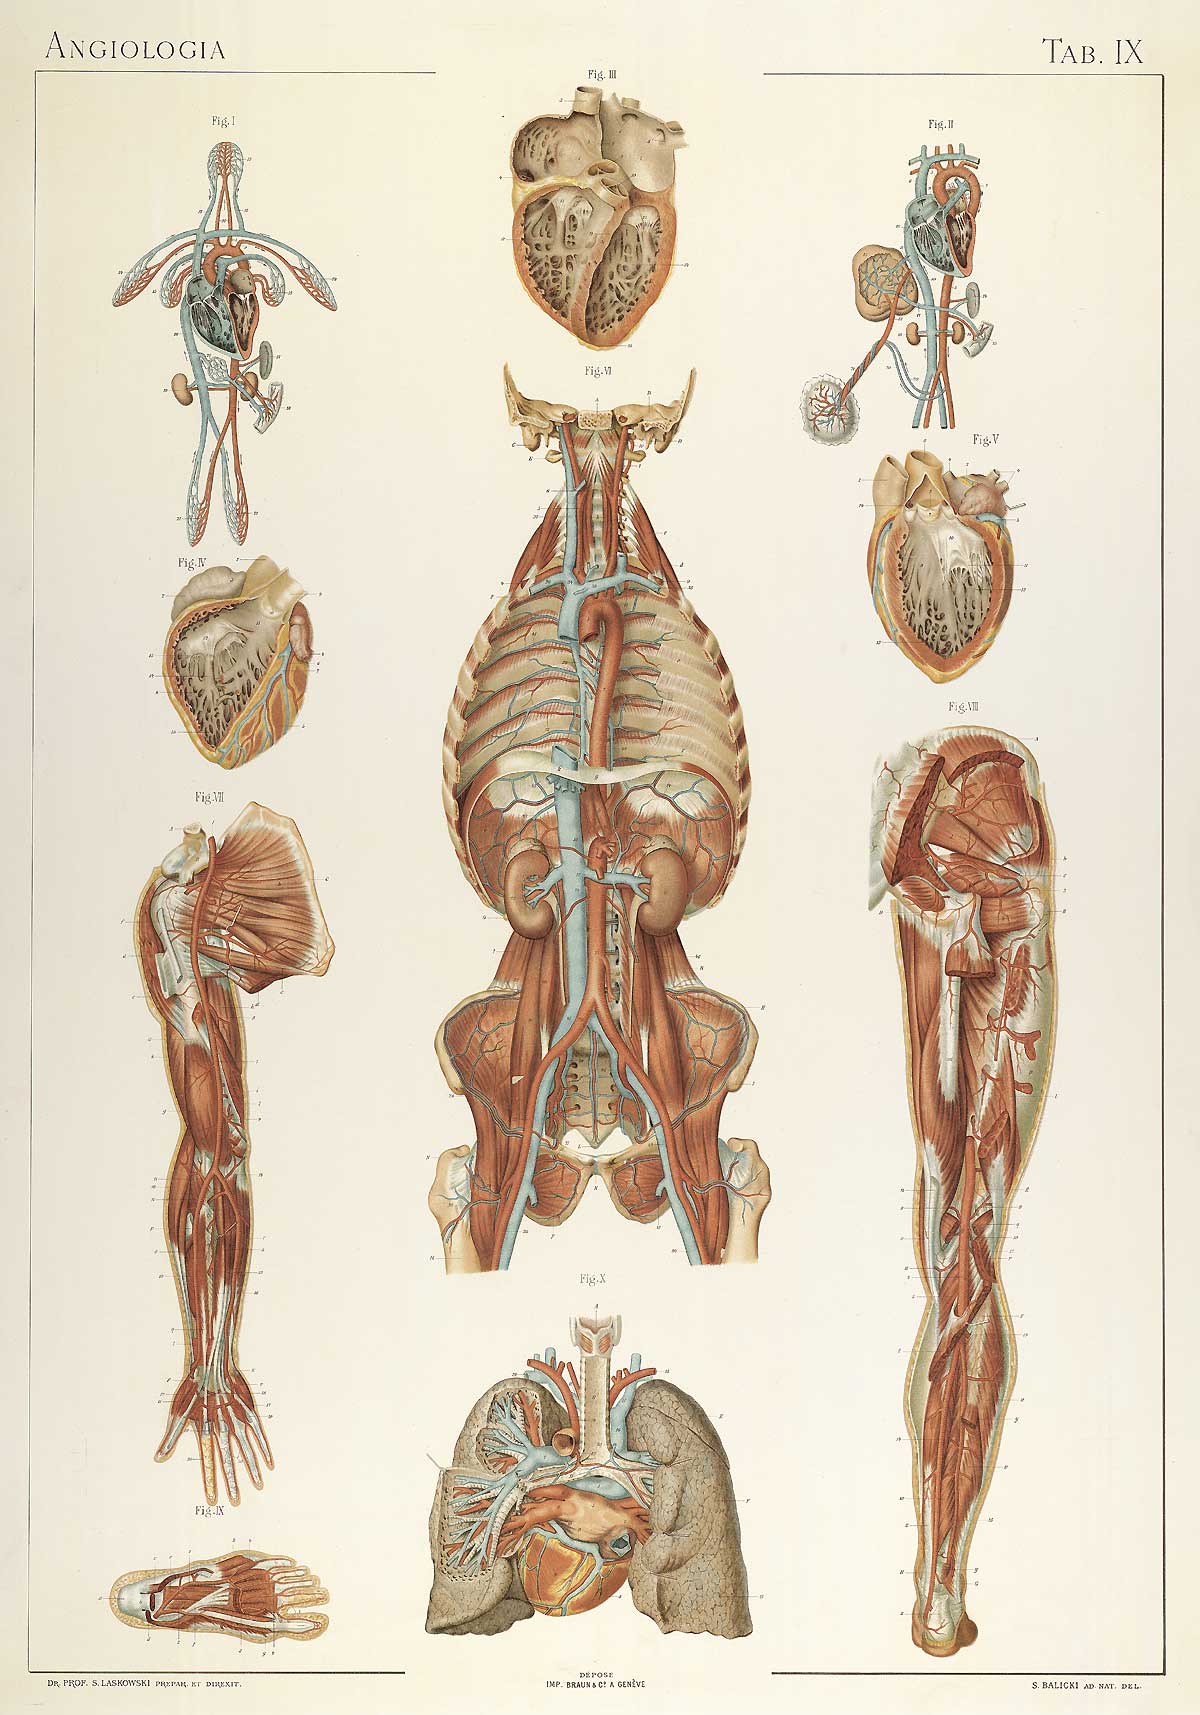 Plate 9 of Sigismond Laskowski's Anatomie normale du corps humain, featuring an interior view of the circulatory system of the body .